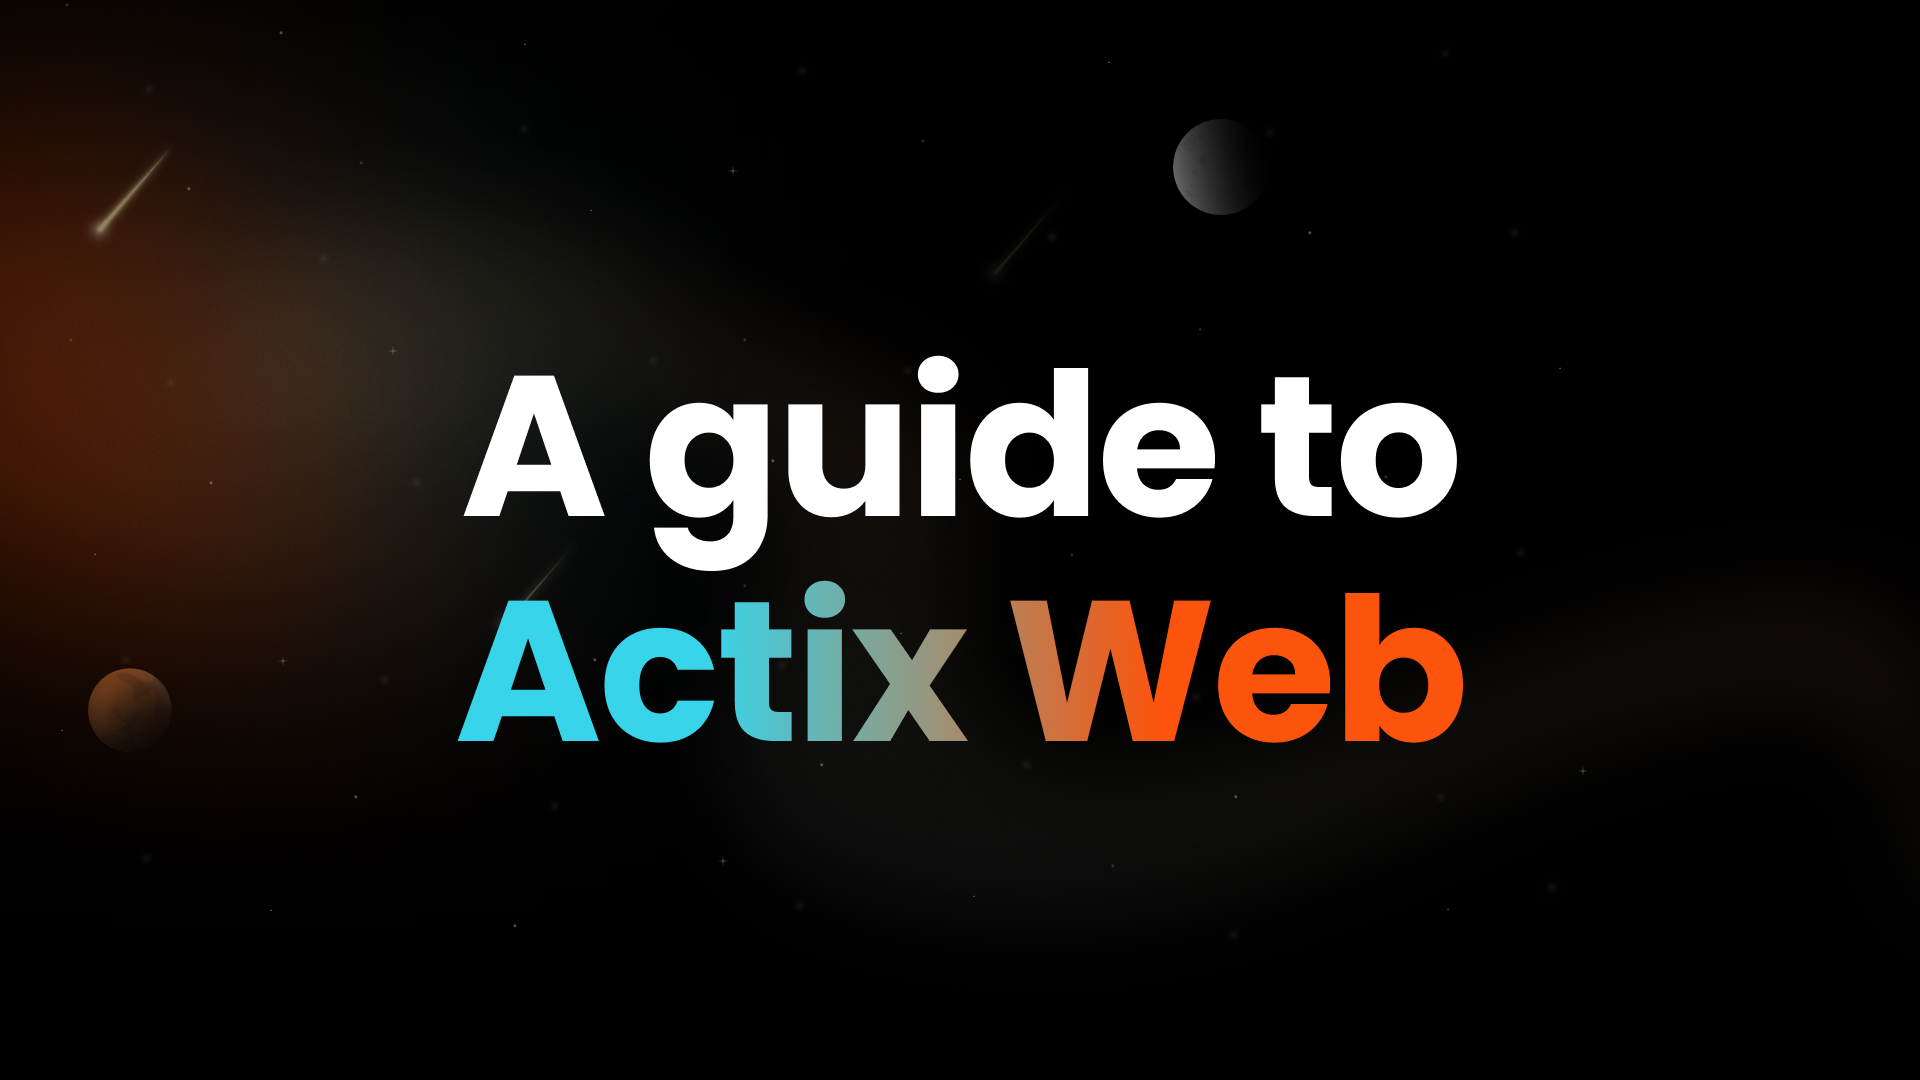 Getting Started with Actix Web in Rust